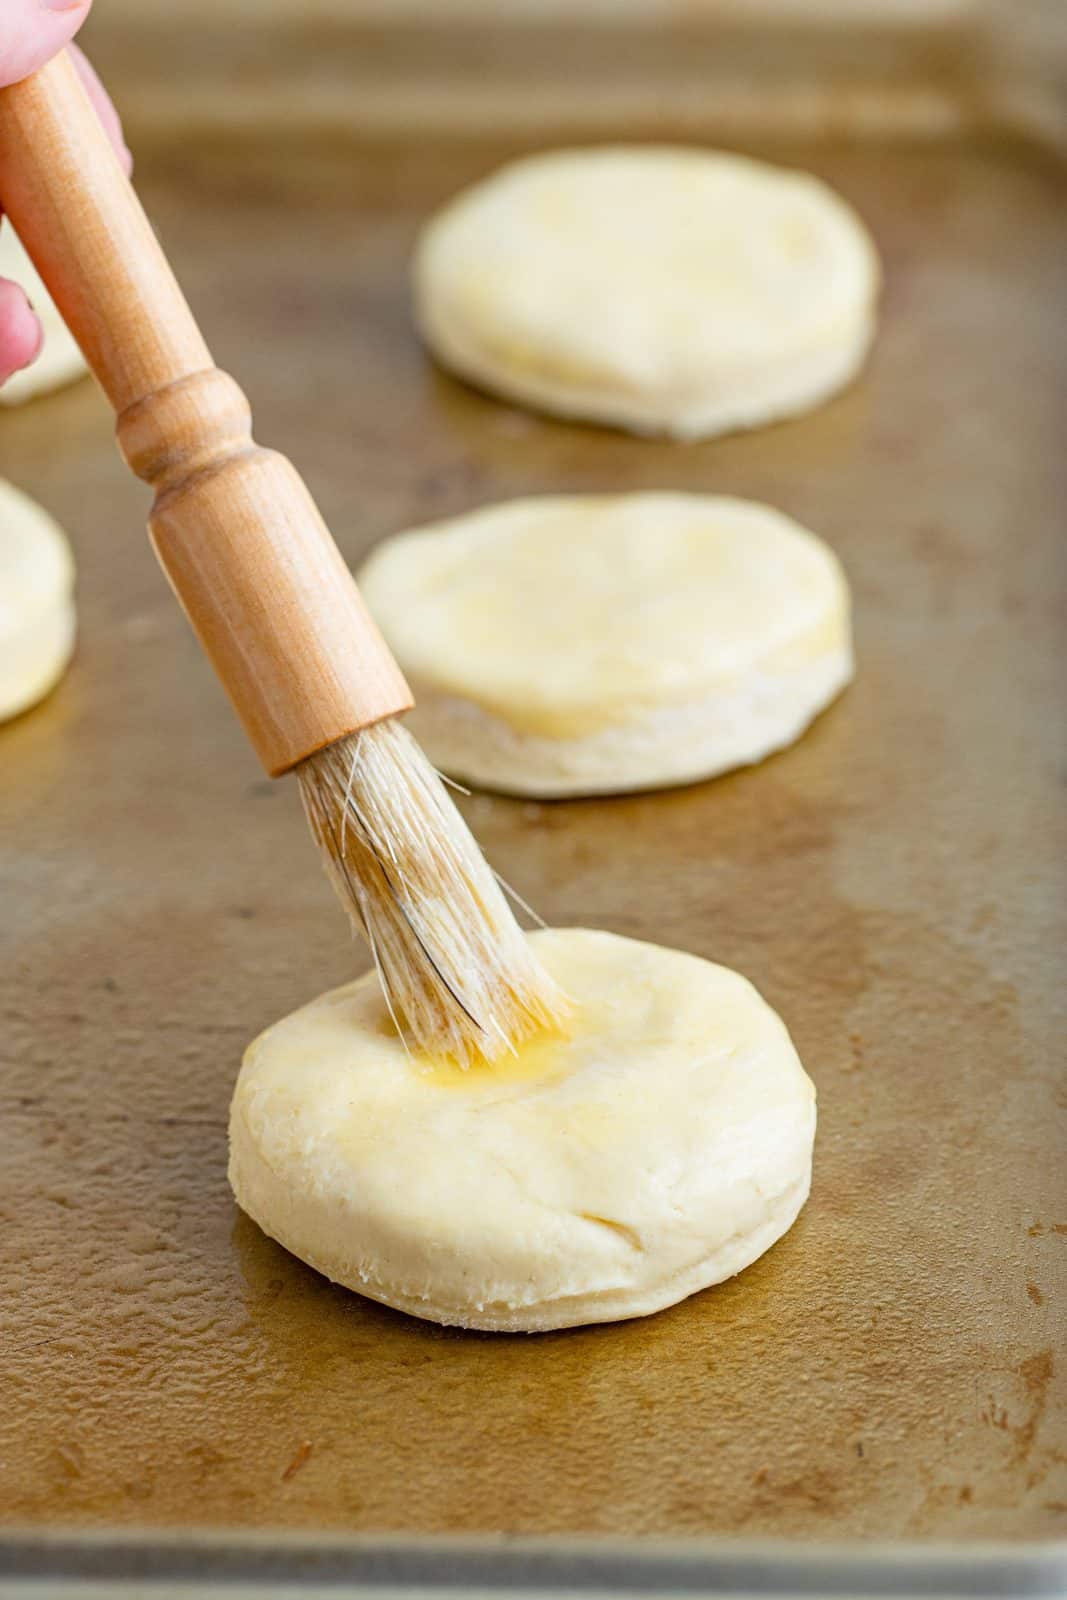 pastry brush shown spreading butter on biscuit dough.